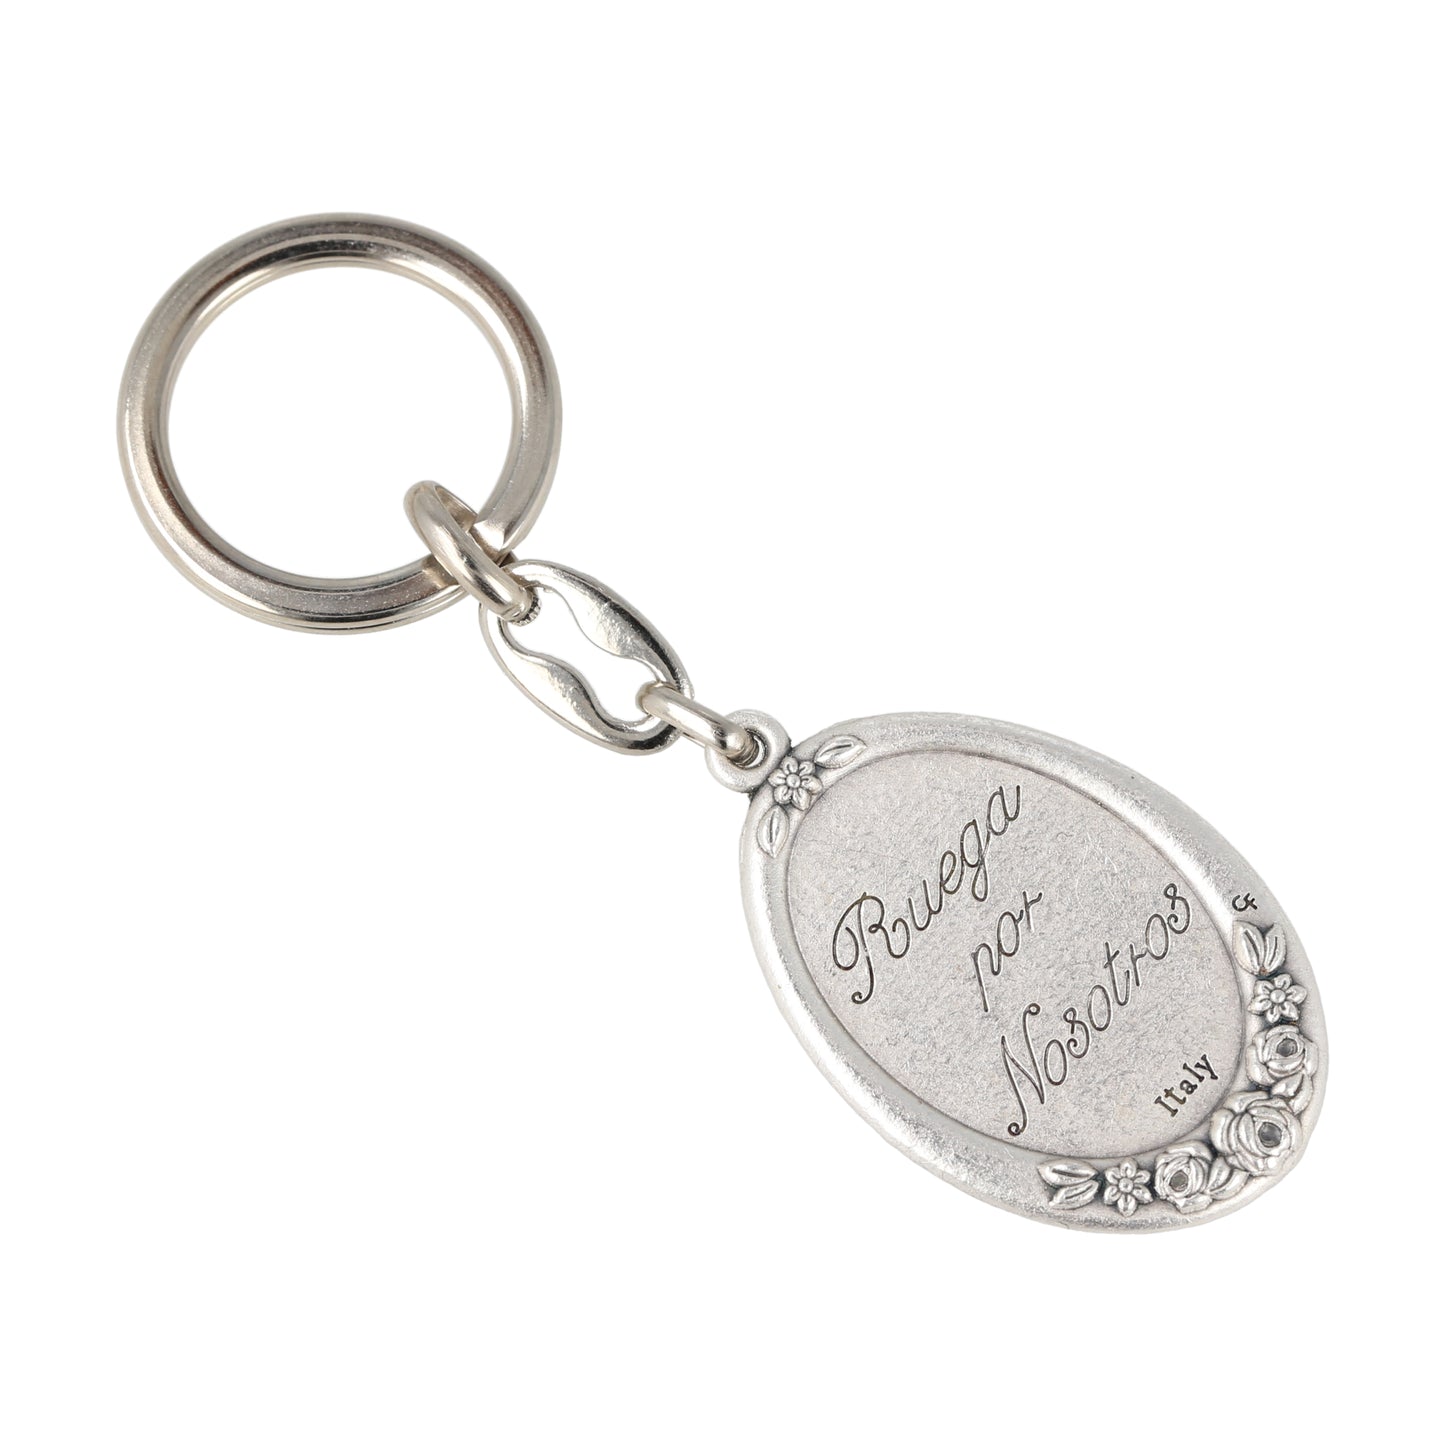 Keychain Our Lady of Lourdes Oval Silver with Flowers. Souvenirs from Italy